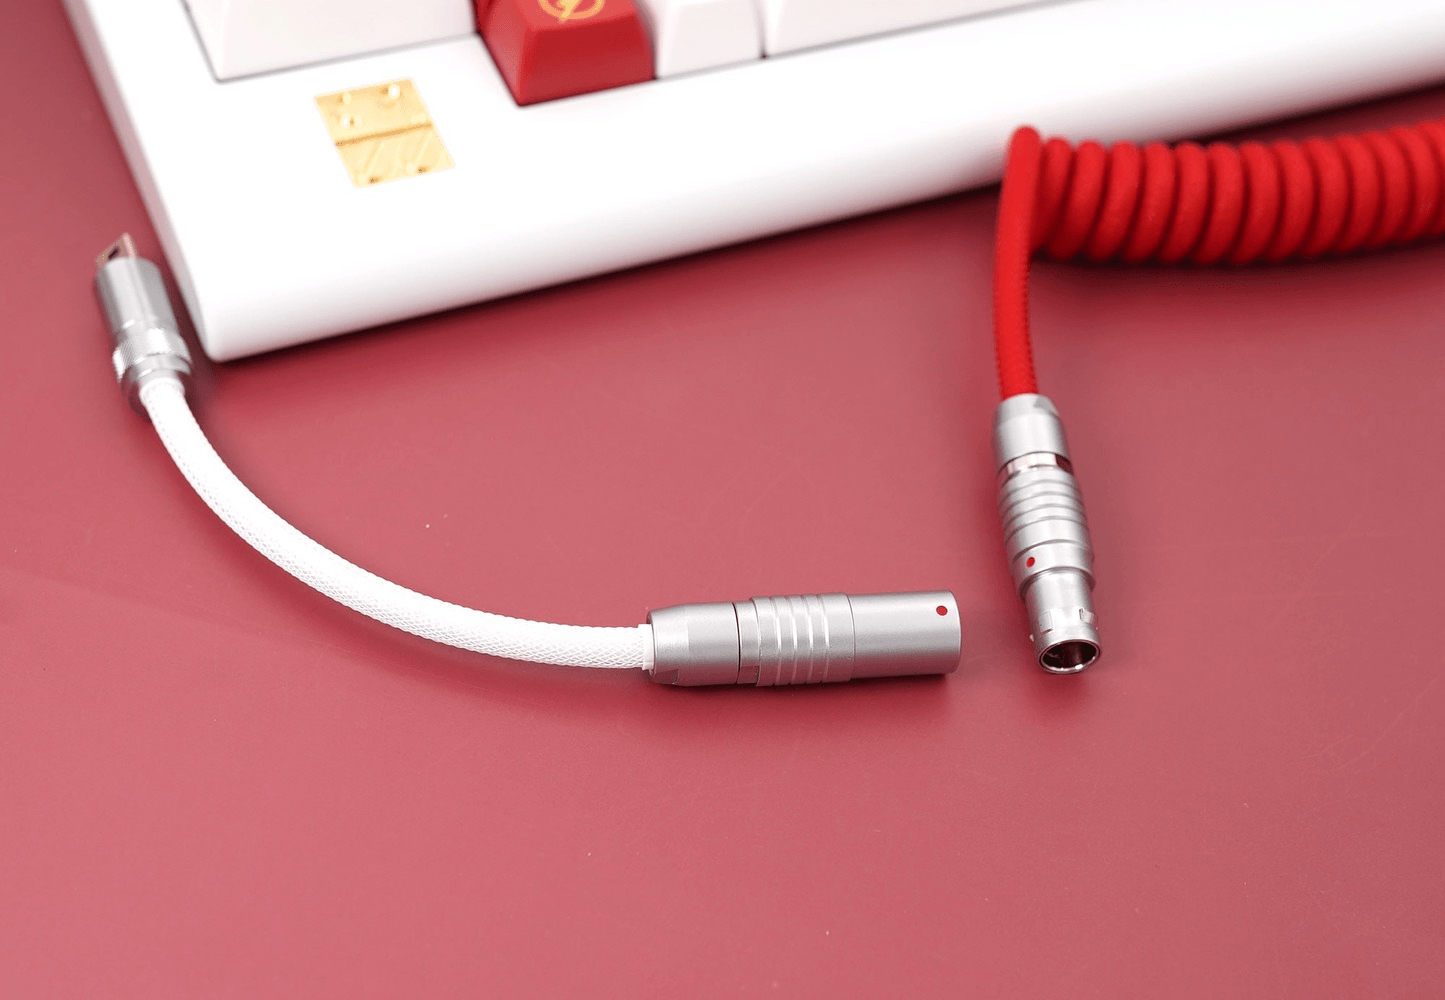 GeekCable Red White Handmade Customized Mechanical Keyboard Cable - IPOPULARSHOP